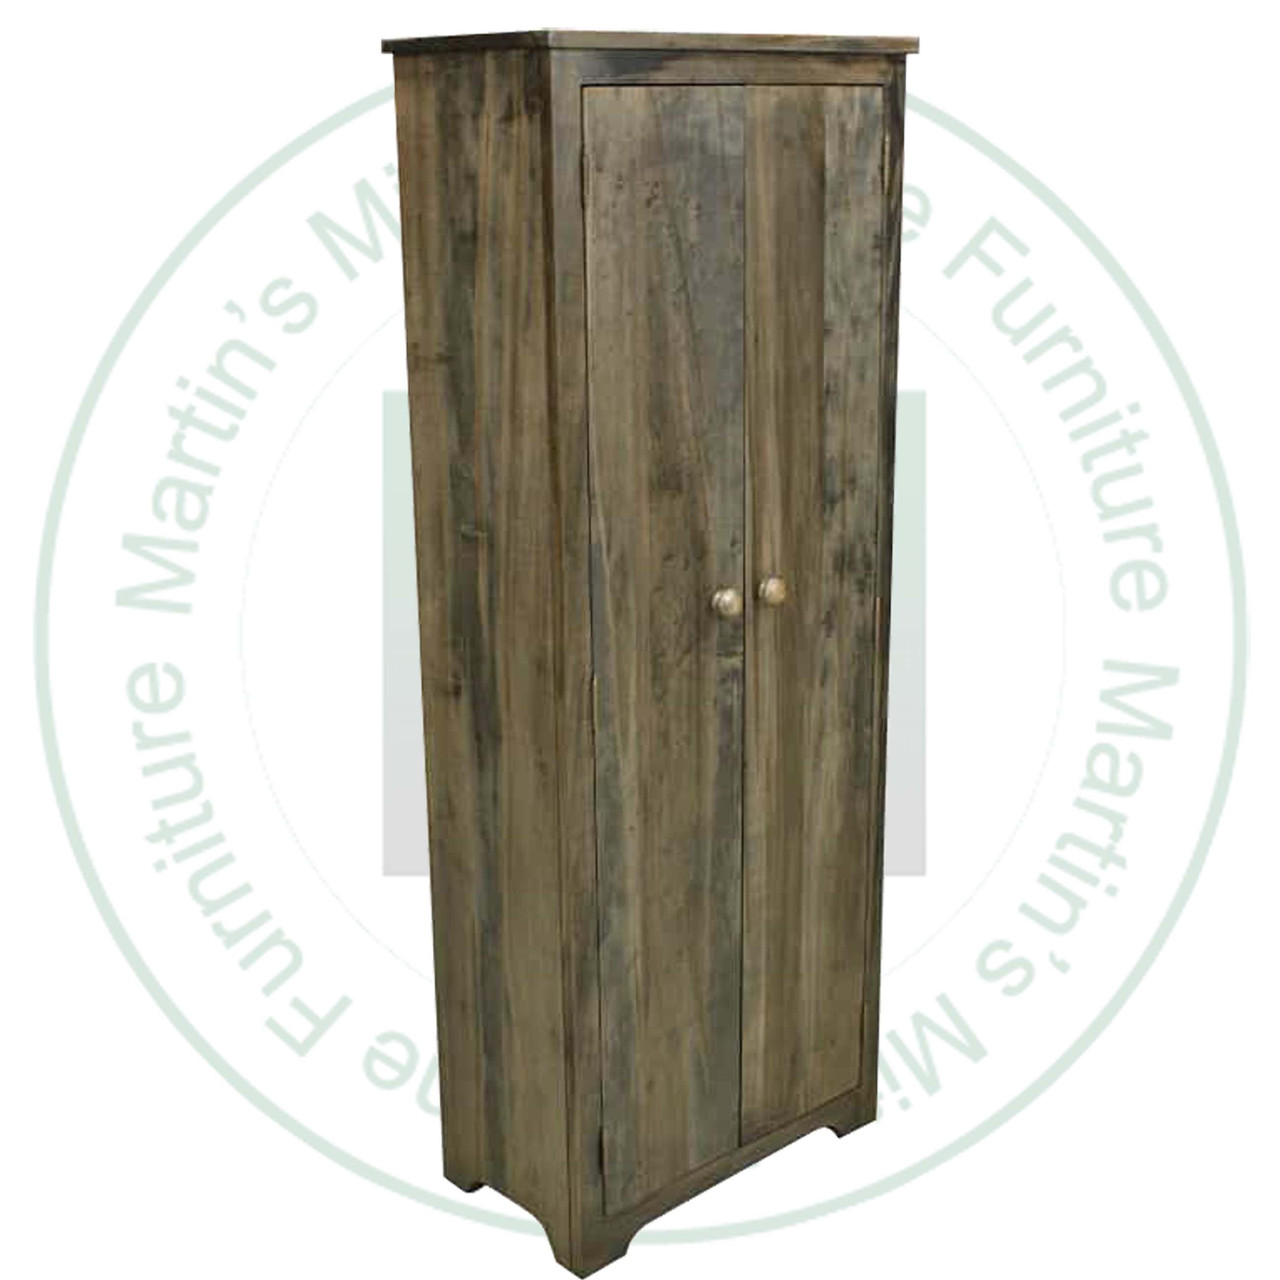 Maple Nith River Jam Cupboard 12''D x 32''W x 72''H With 2 Doors